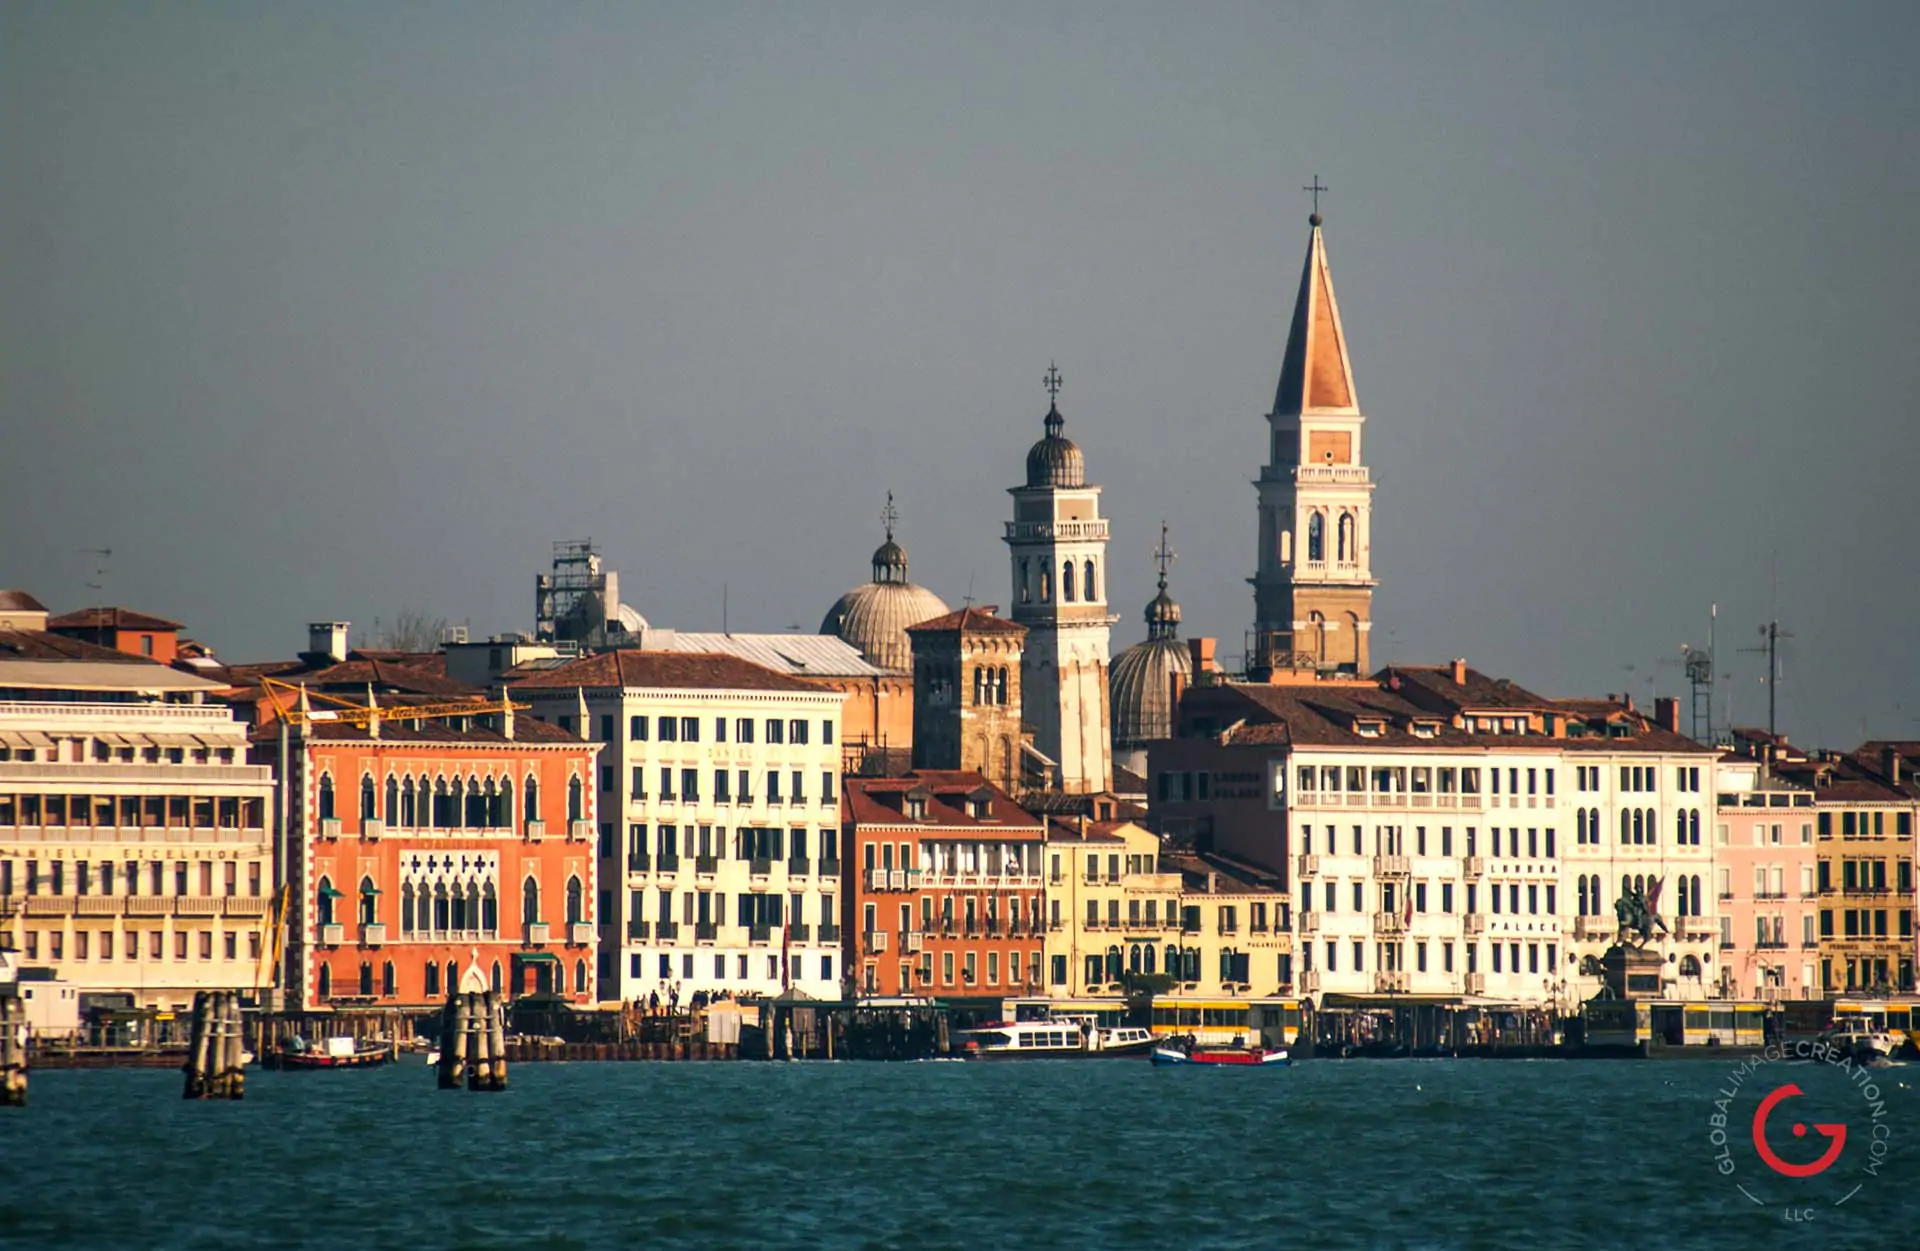 Venice, Italy Skyline - Professional Architecture Photographer and Commercial Photography of Buildings